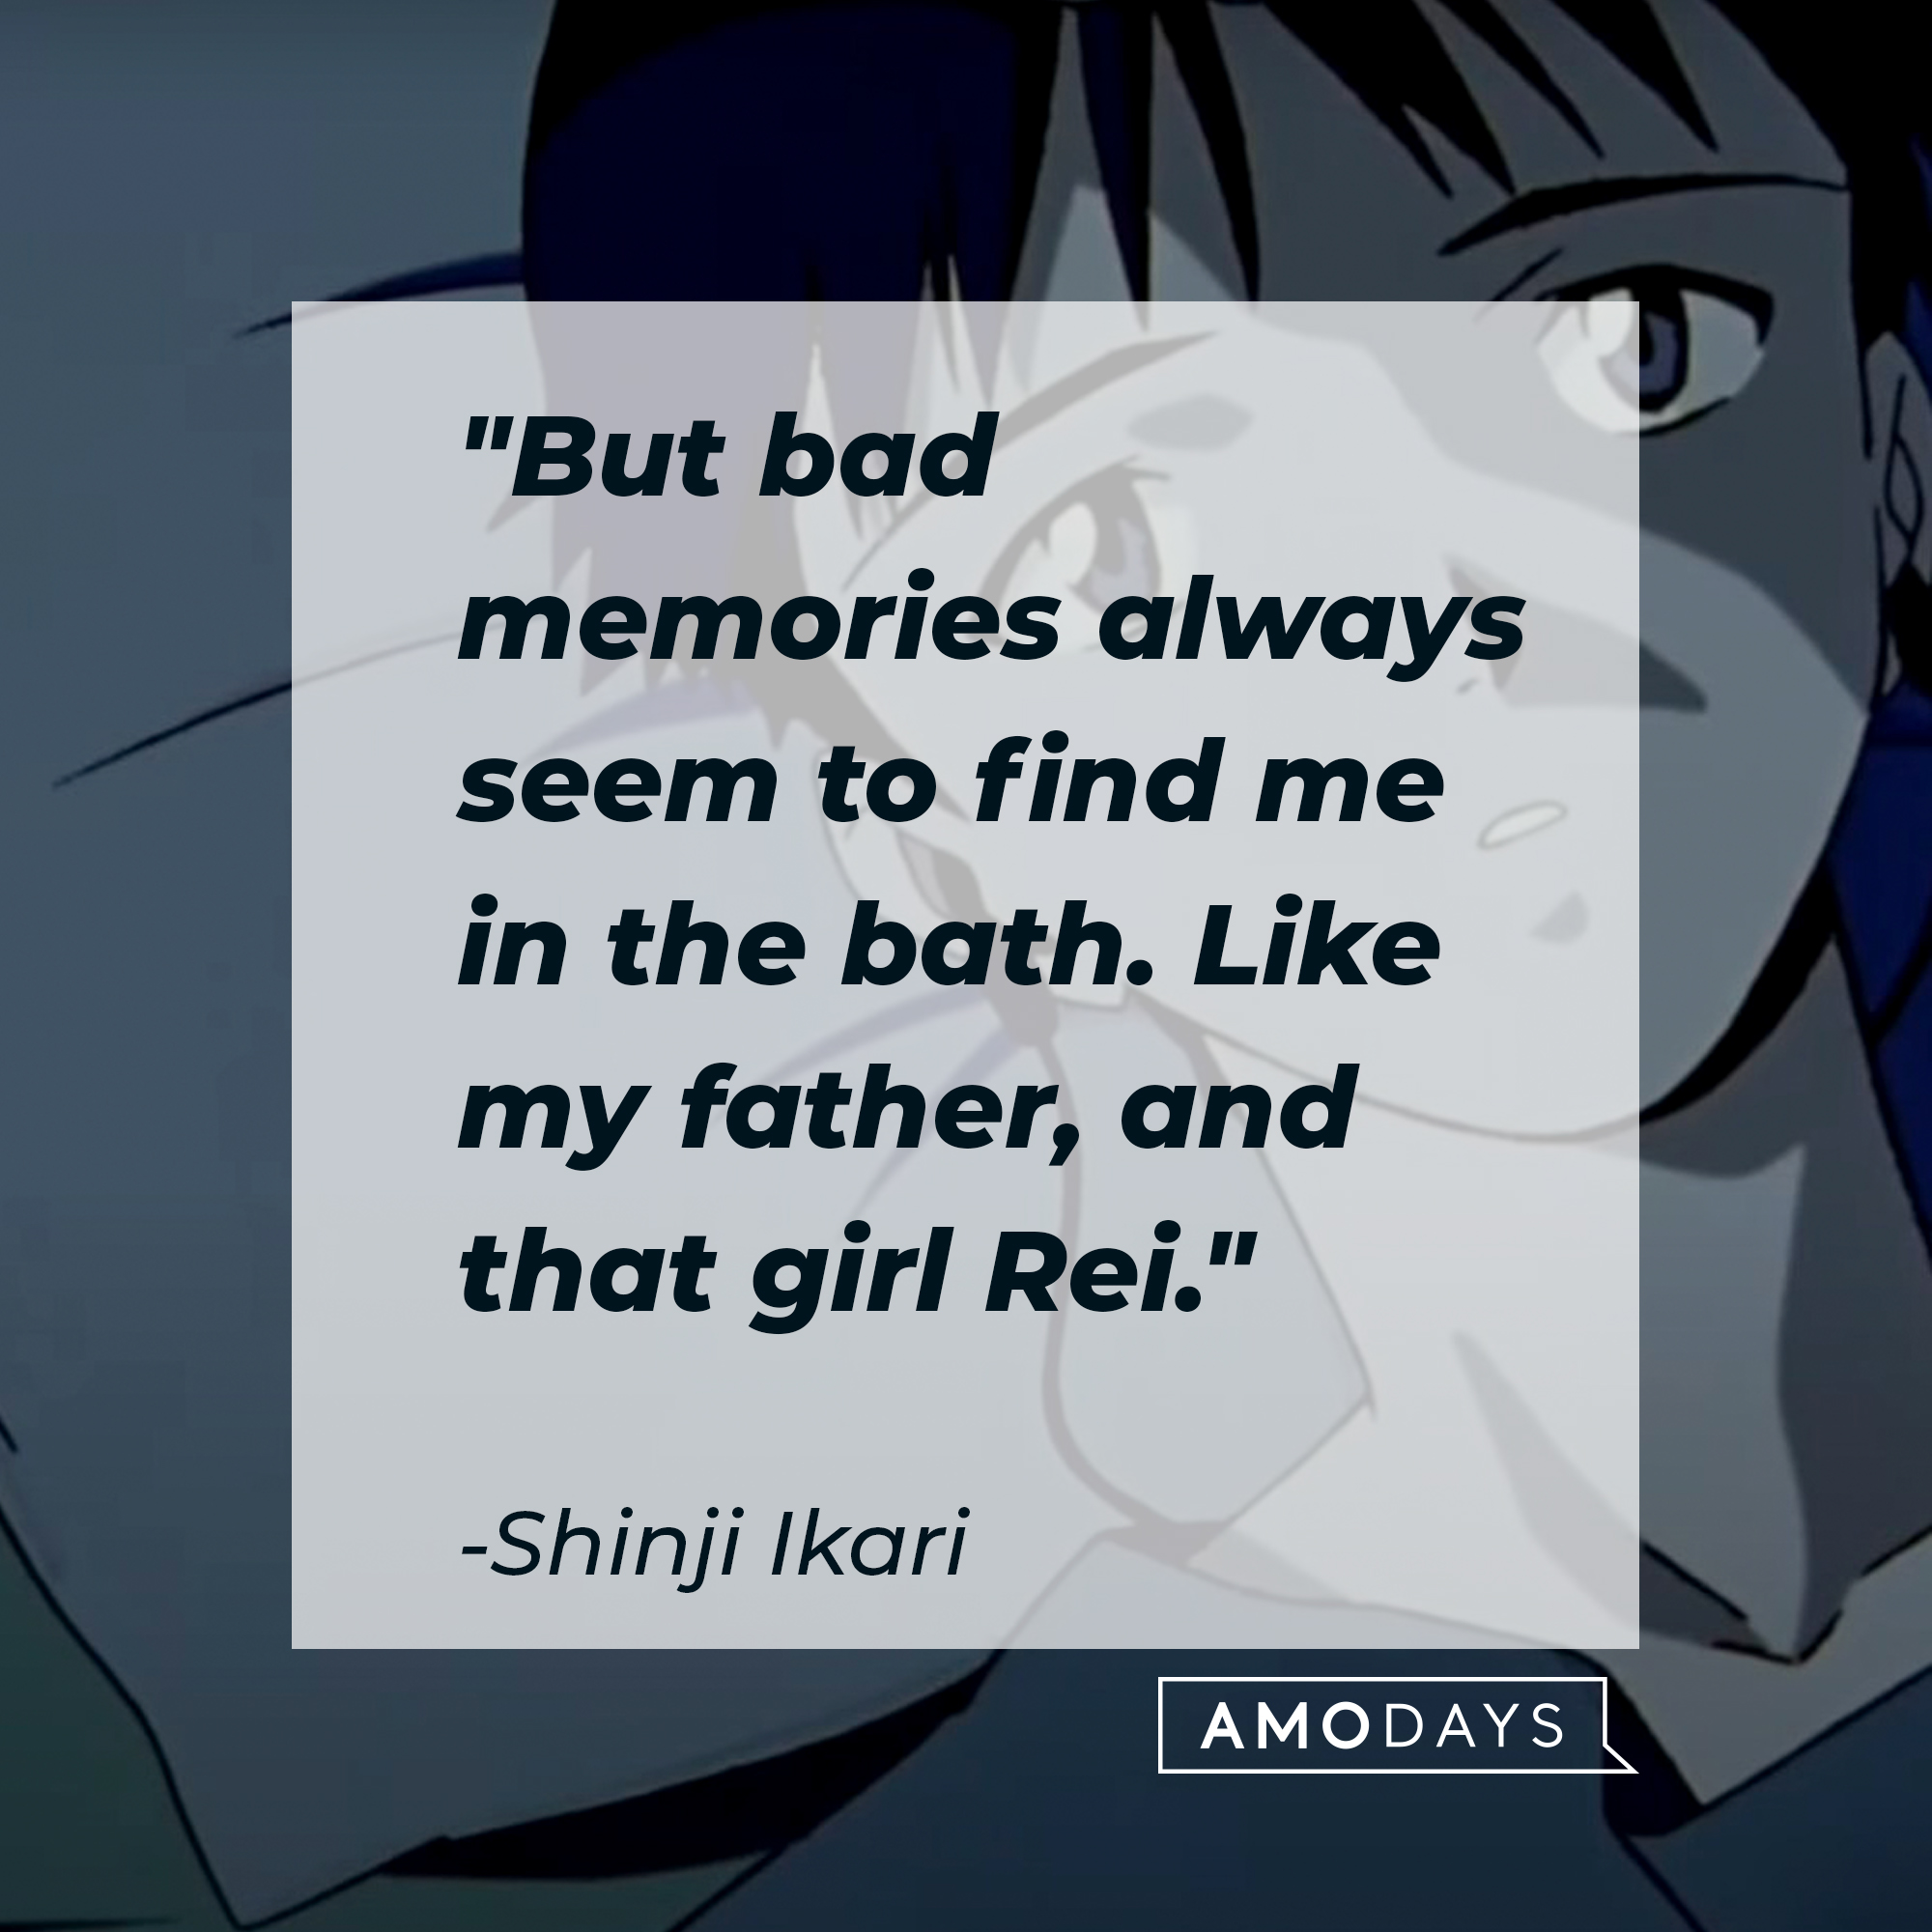 Shinji Ikari's quote: "But bad memories always seem to find me in the bath. Like my father, and that girl Rei." | Source: Facebook.com/EvangelionMovie